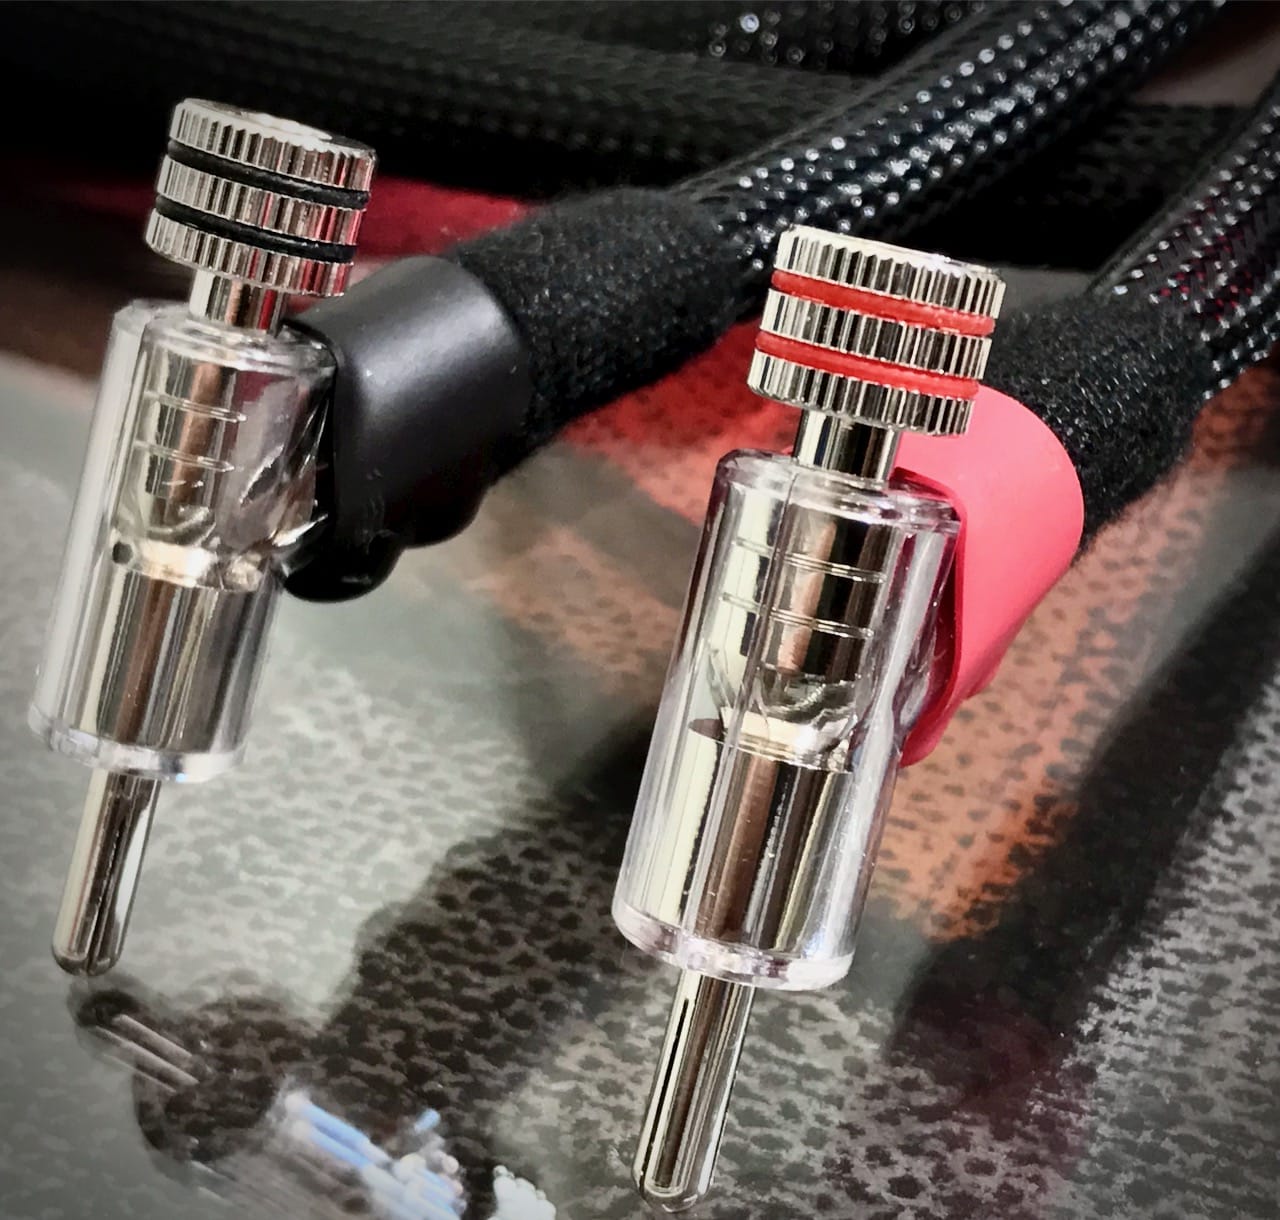 The Reference audiophile speaker cable